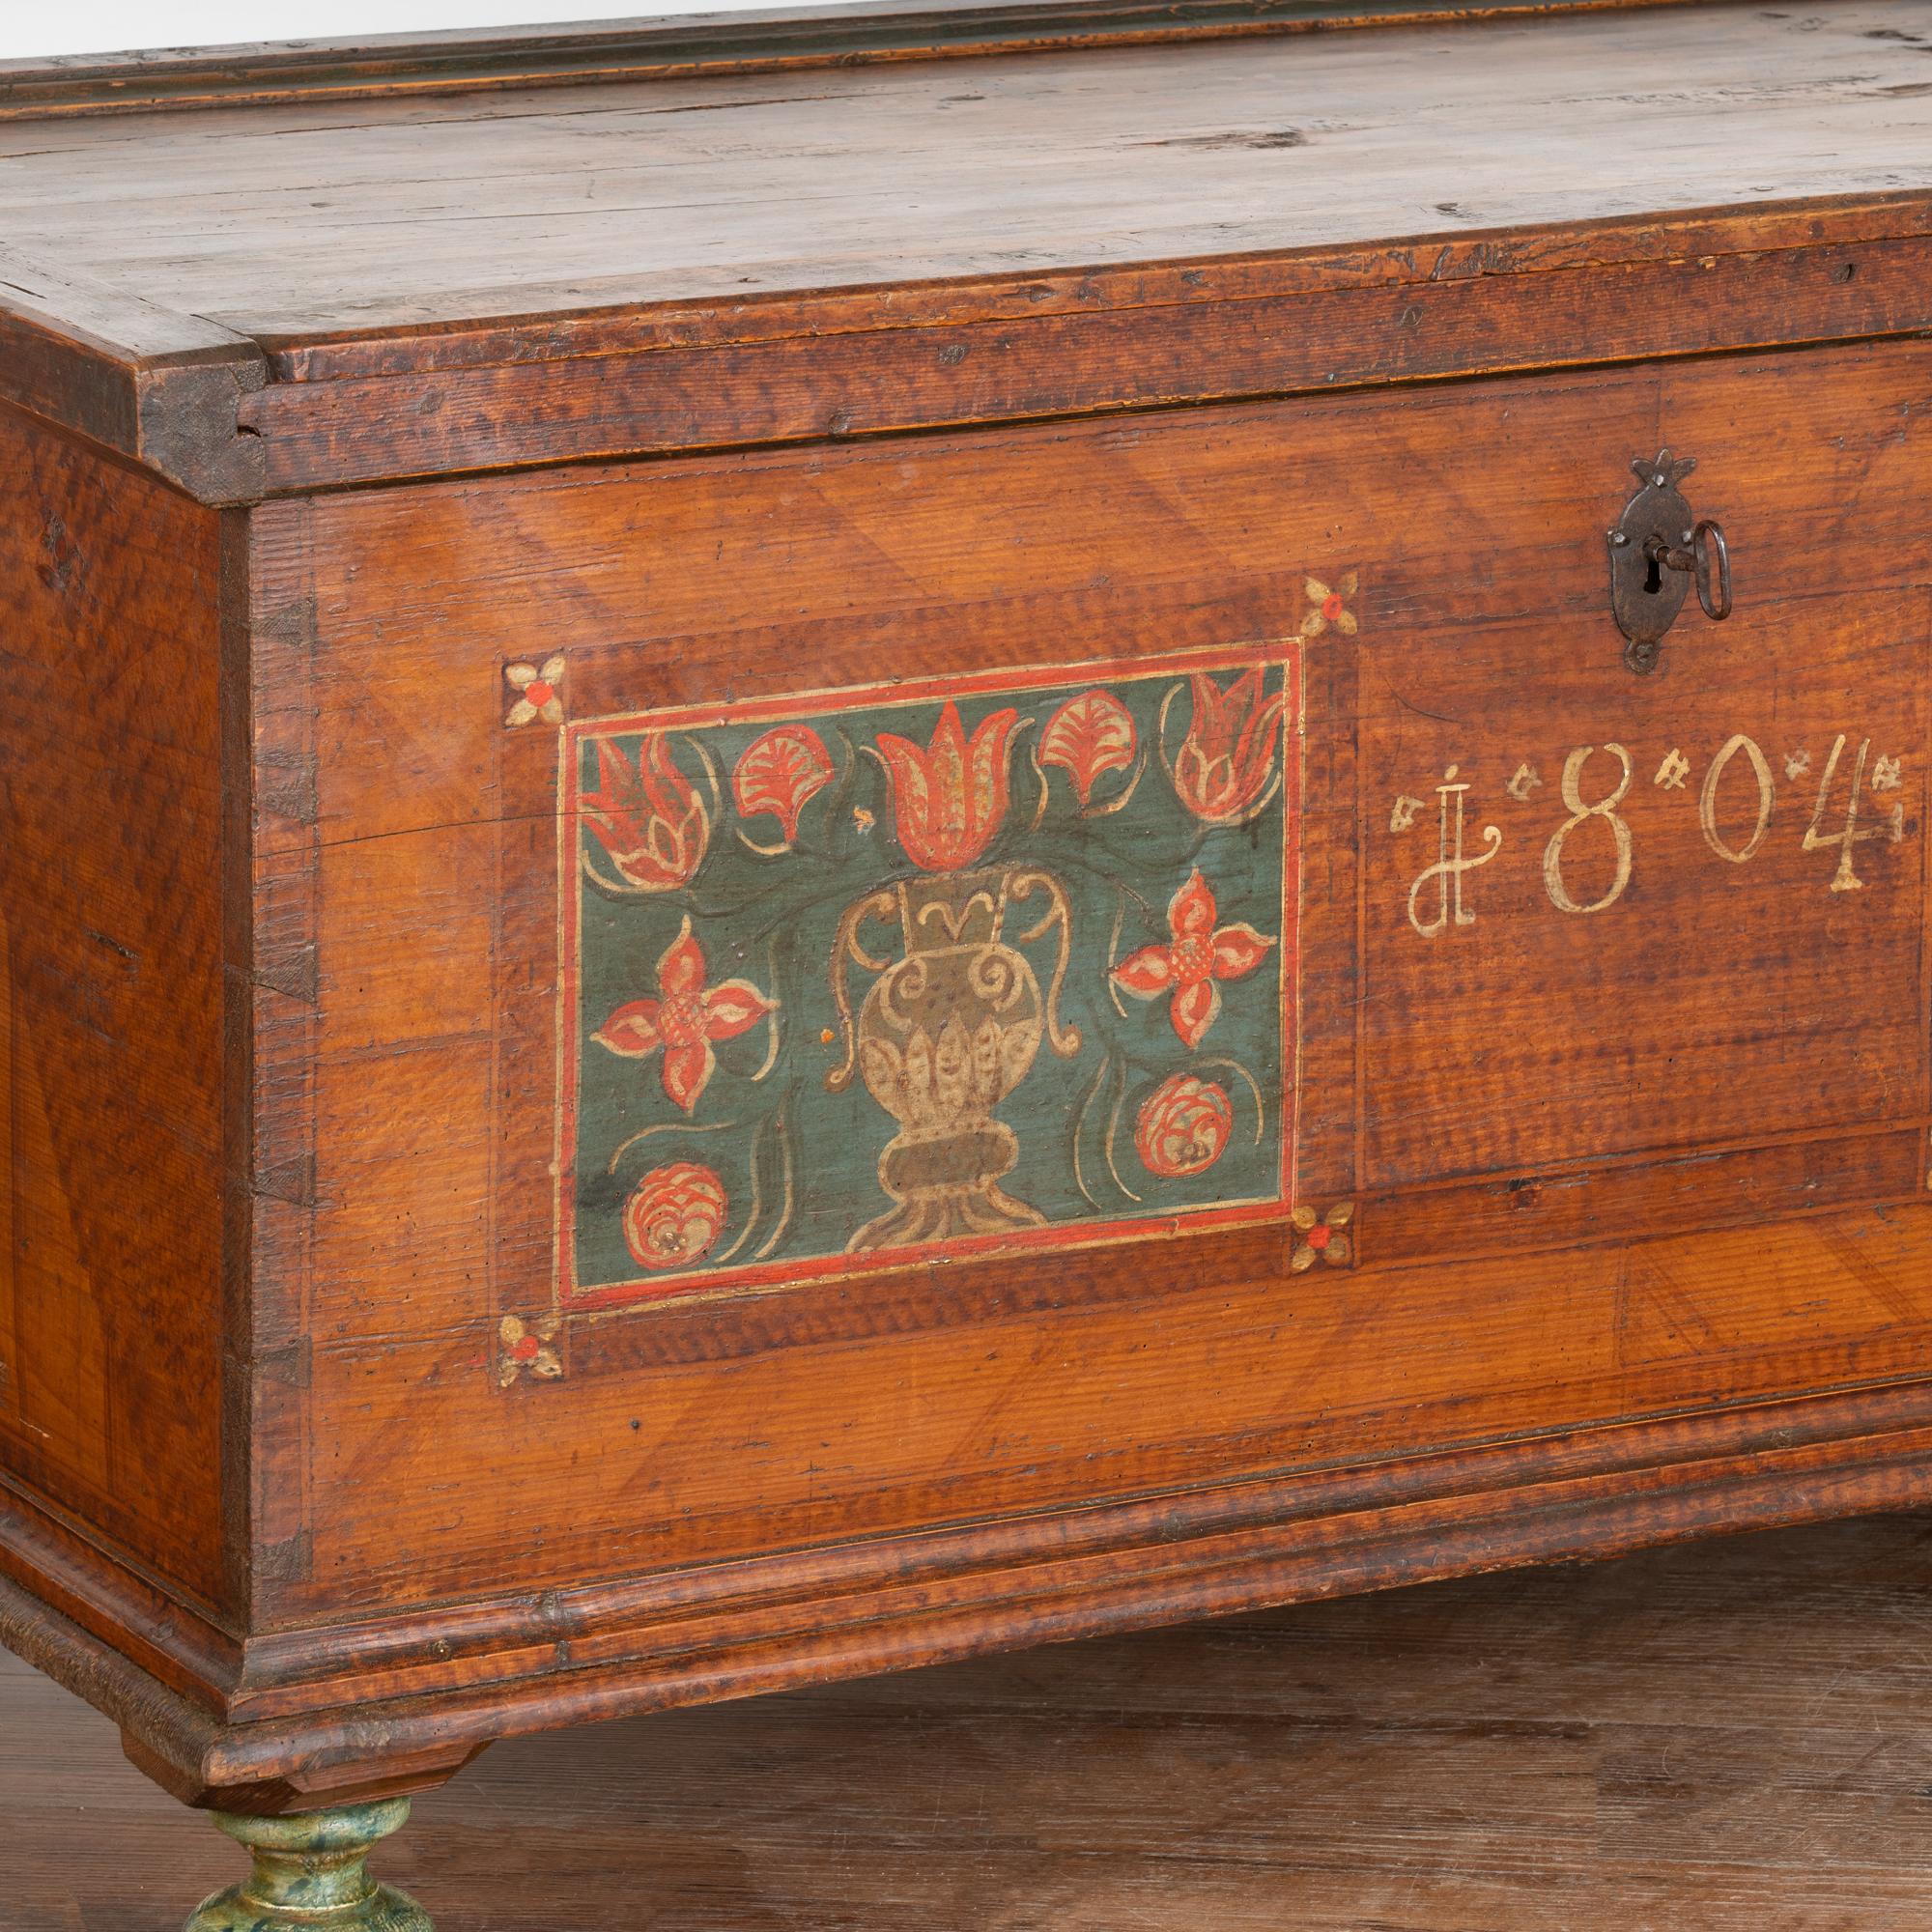 Original Painted Flat Top Trunk With Flowers, Austria dated 1804 For Sale 1